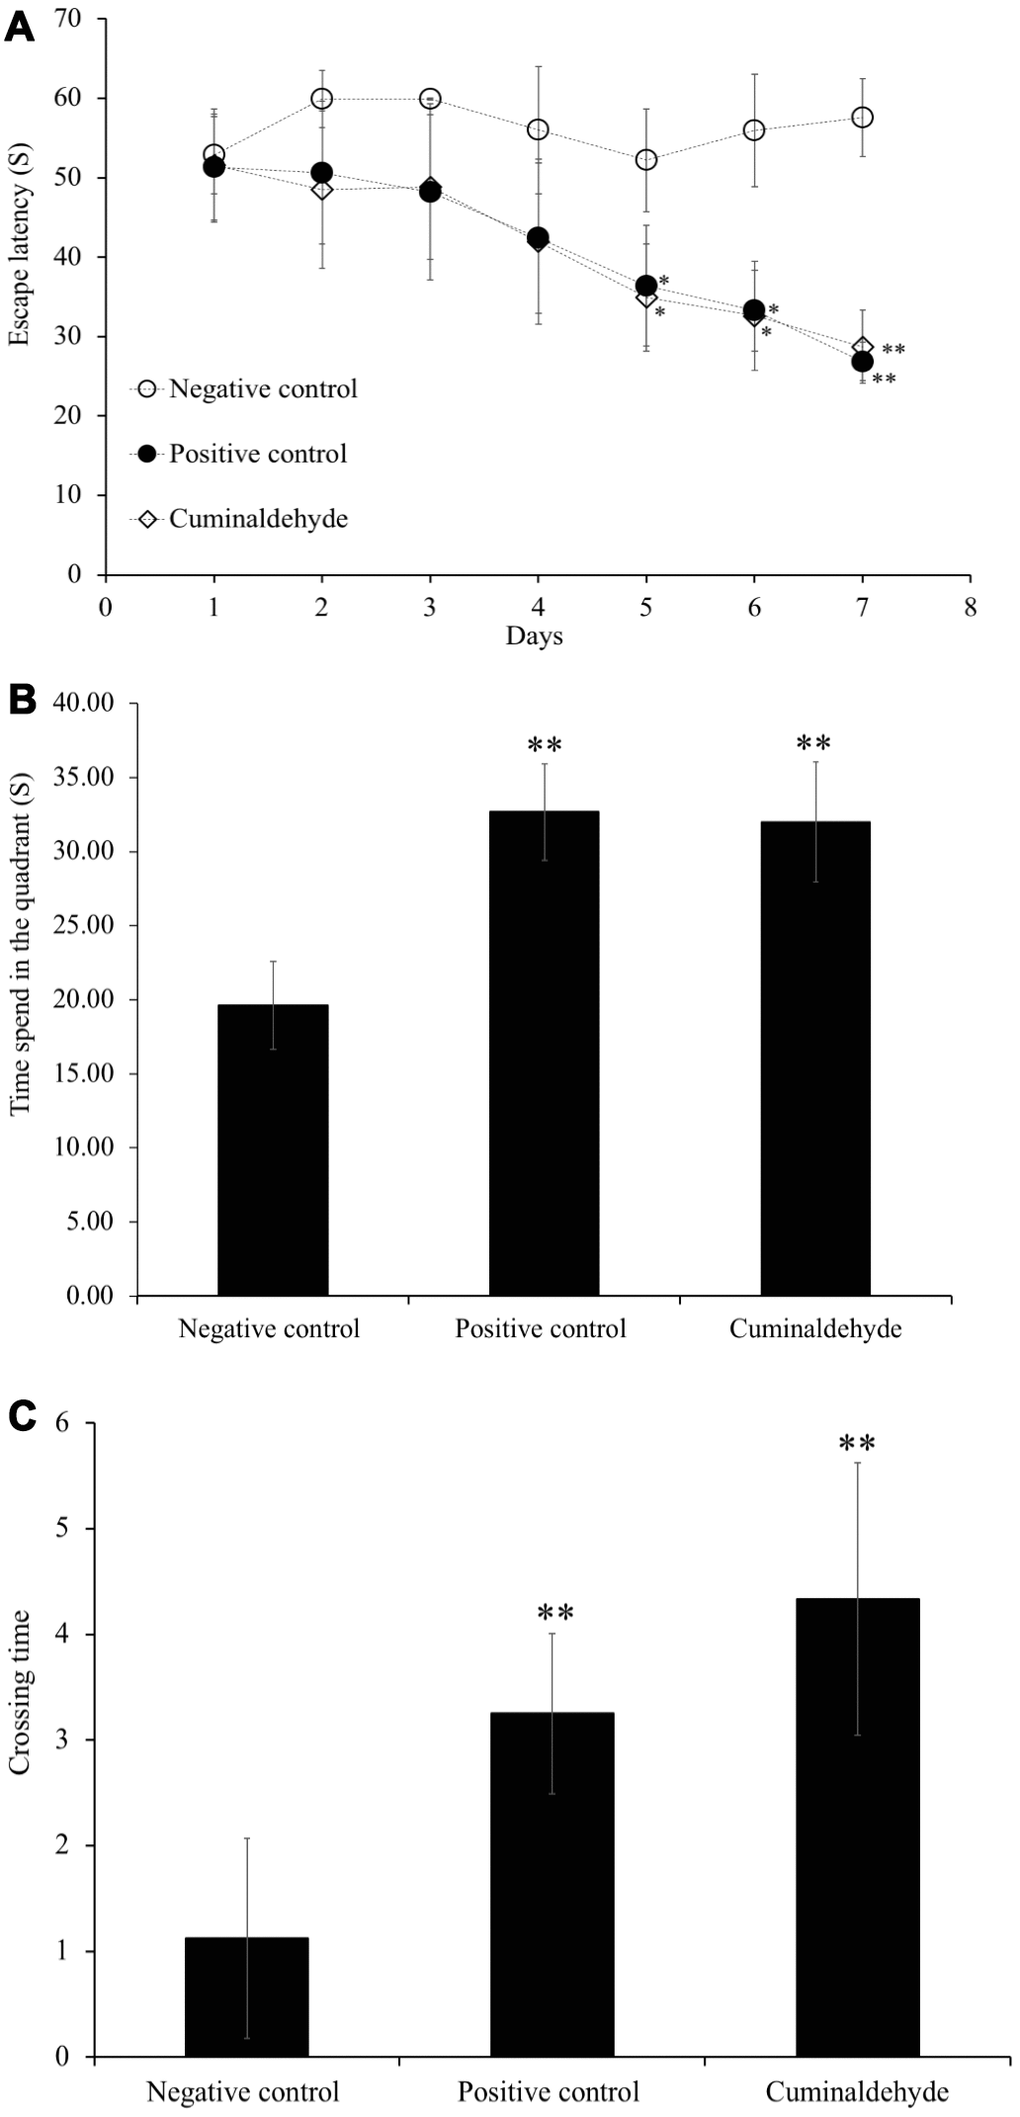 Effects of CA (25 mg/kg) on escape latency time during the morris water maze trial sessions, on (A) the time spent in the quadrant and (B) crossing time, (C) time taken during probe trial sessions on C57BL/6J mice. Mice were administered orally with water or CA (25 mg/kg/day) for 30 days, 60 min prior to trial sessions. The training trial and probe trial sessions were performed as described in the Materials and Methods. All the values are expressed as mean ± SD. NC: negative control (aged water-treated group); PC: positive control (young water-treated group); CA: Cuminaldehyde treated group. * P 